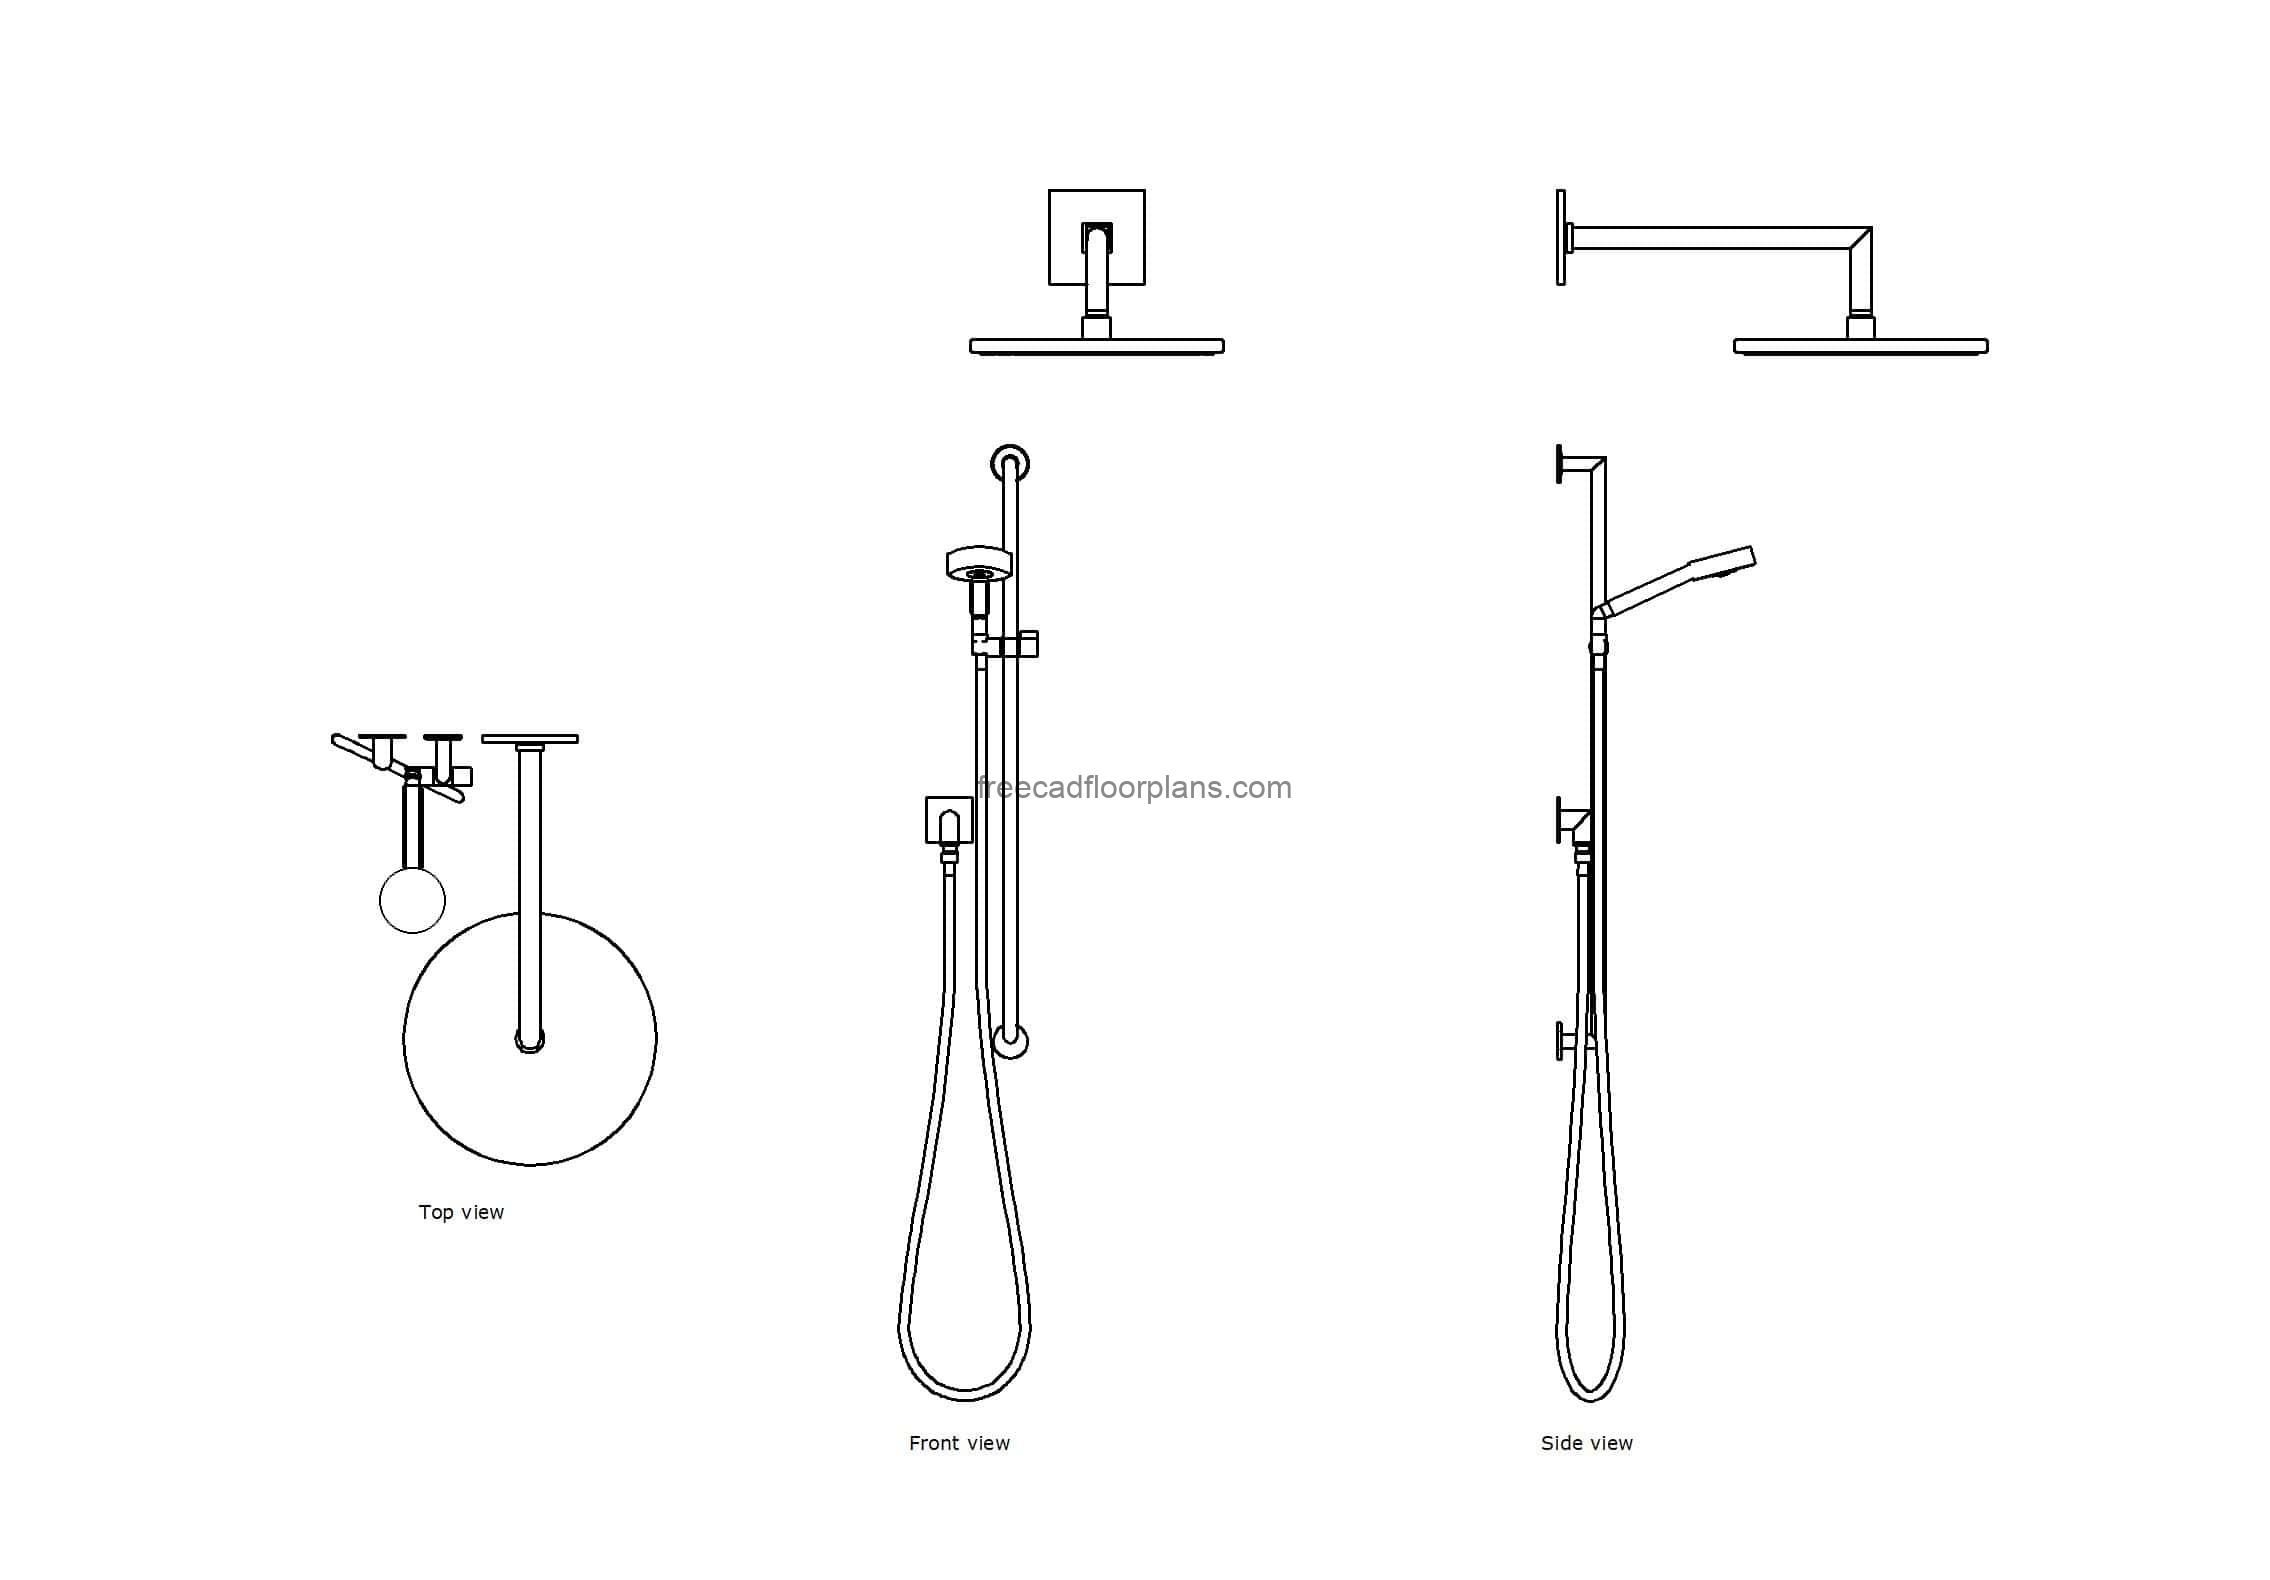 autocad drawing of a handheld shower set, plan and elevation 2d views, dwg file free for download